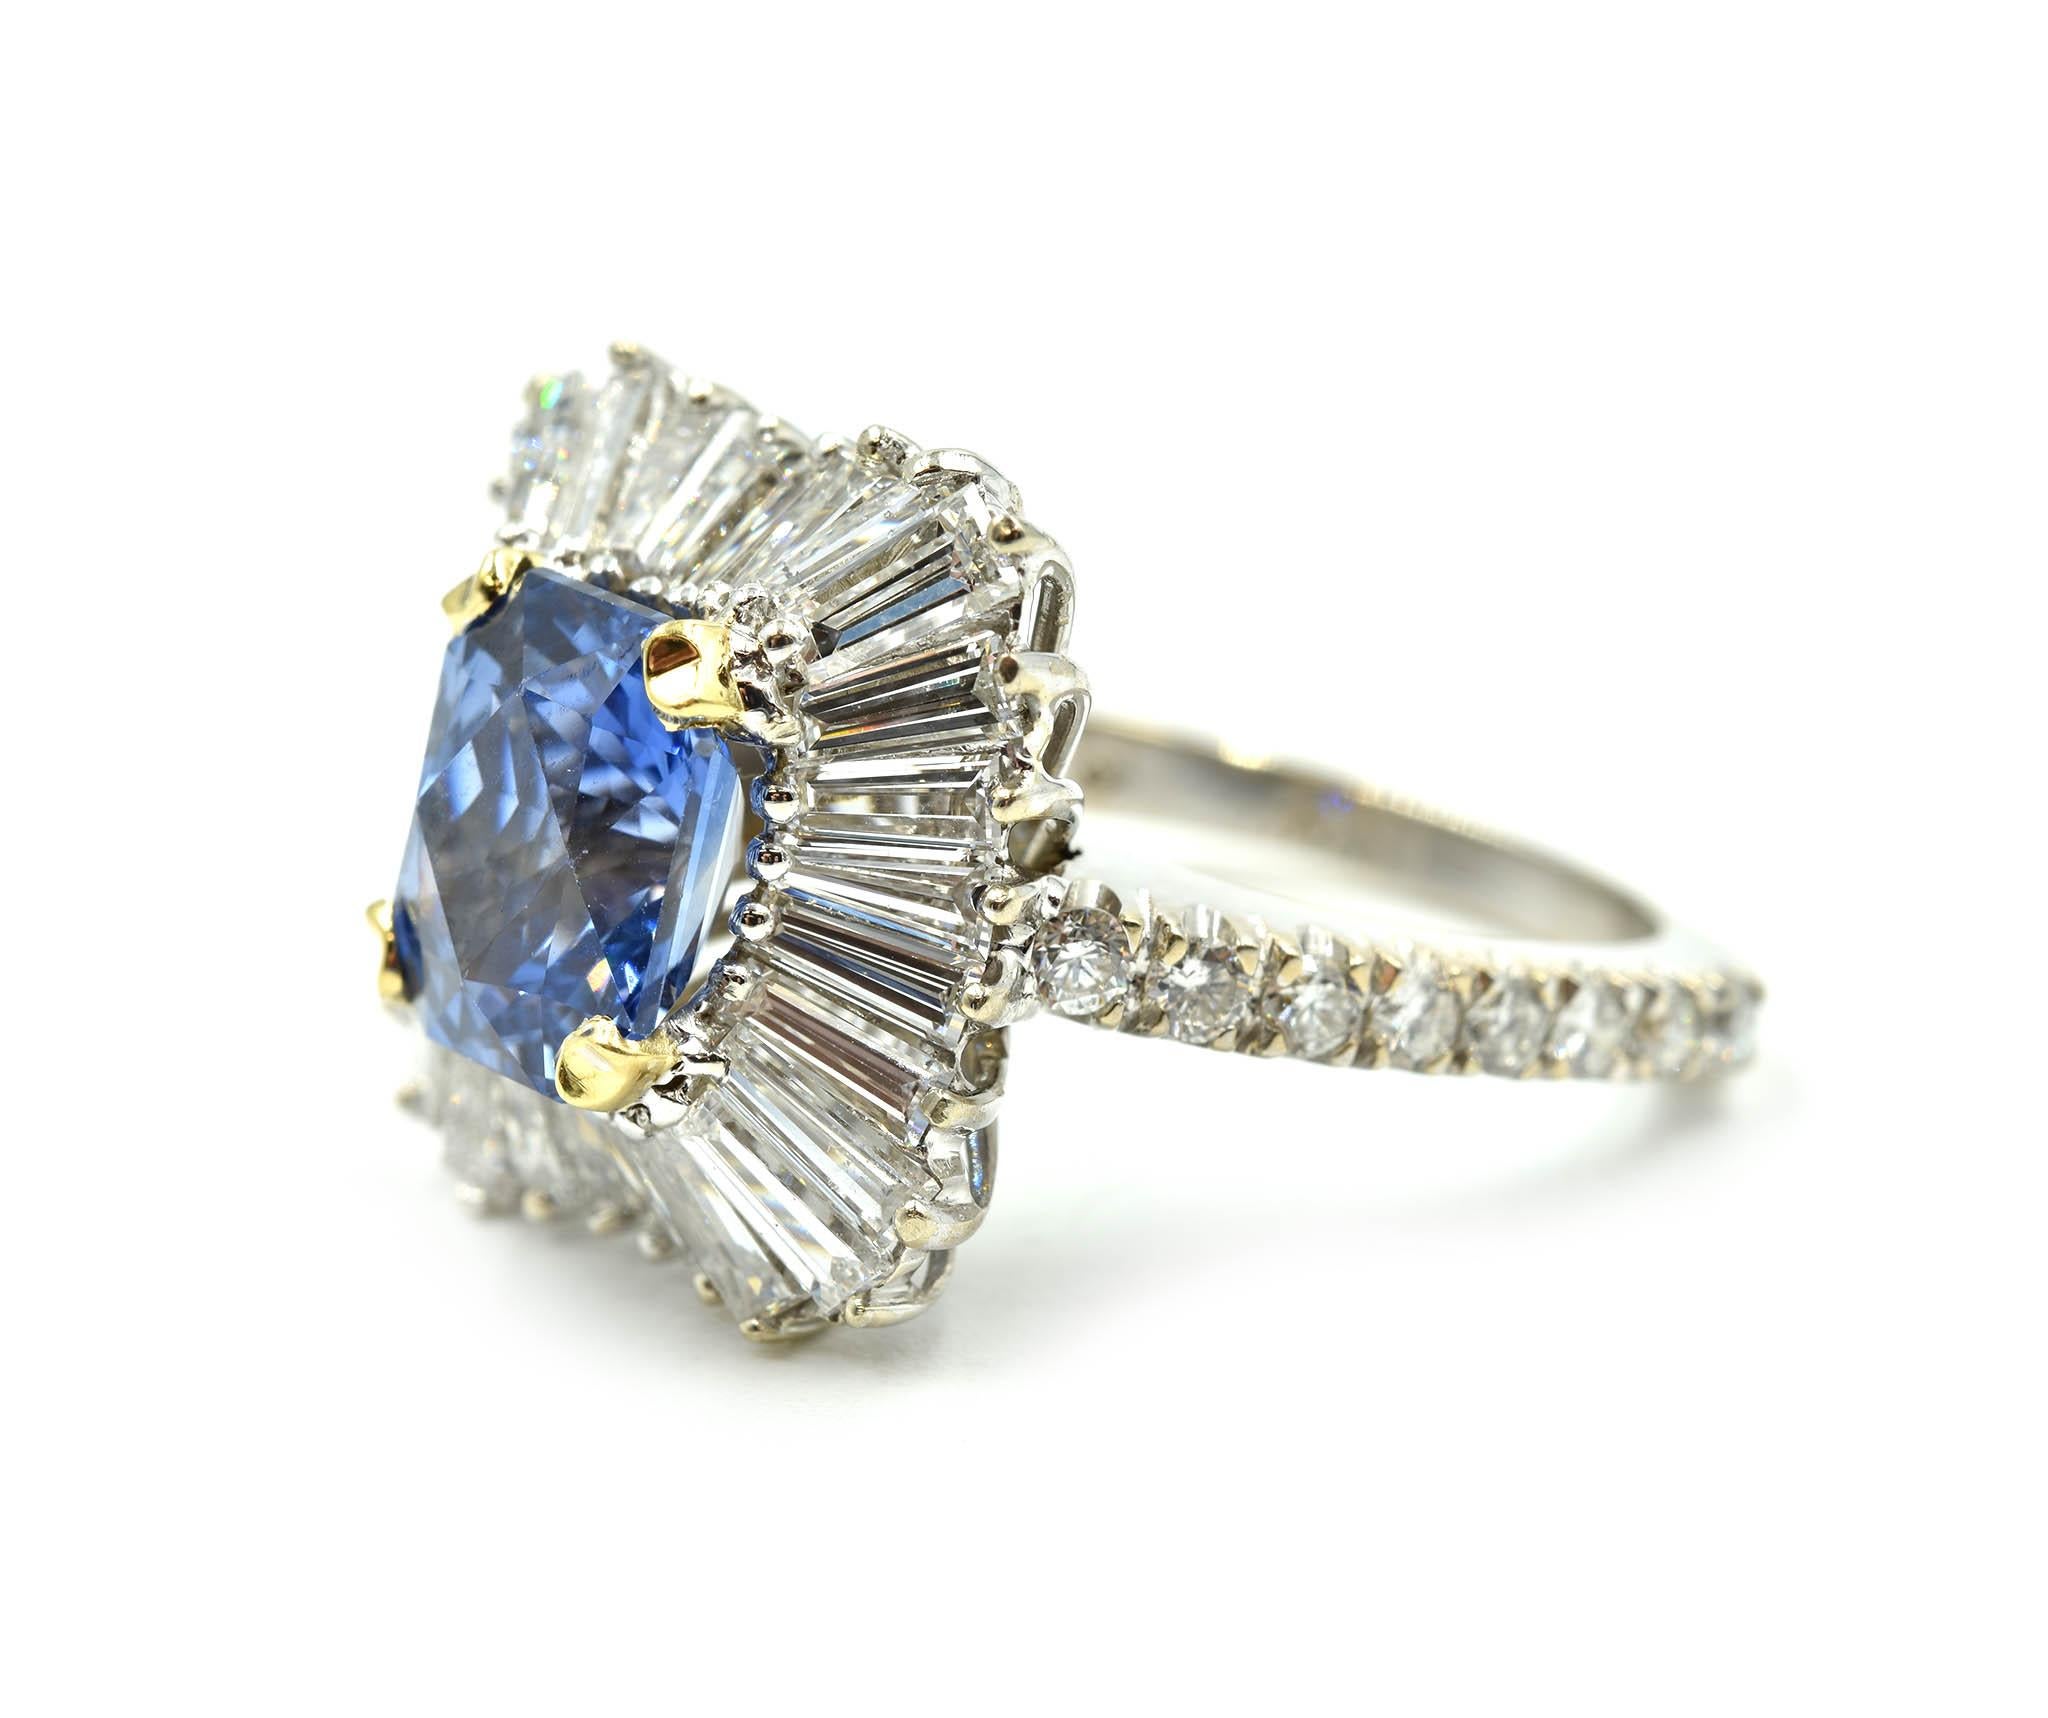 Round Cut Sapphire with Baguette Diamond Halo Ring 18 Karat White Gold